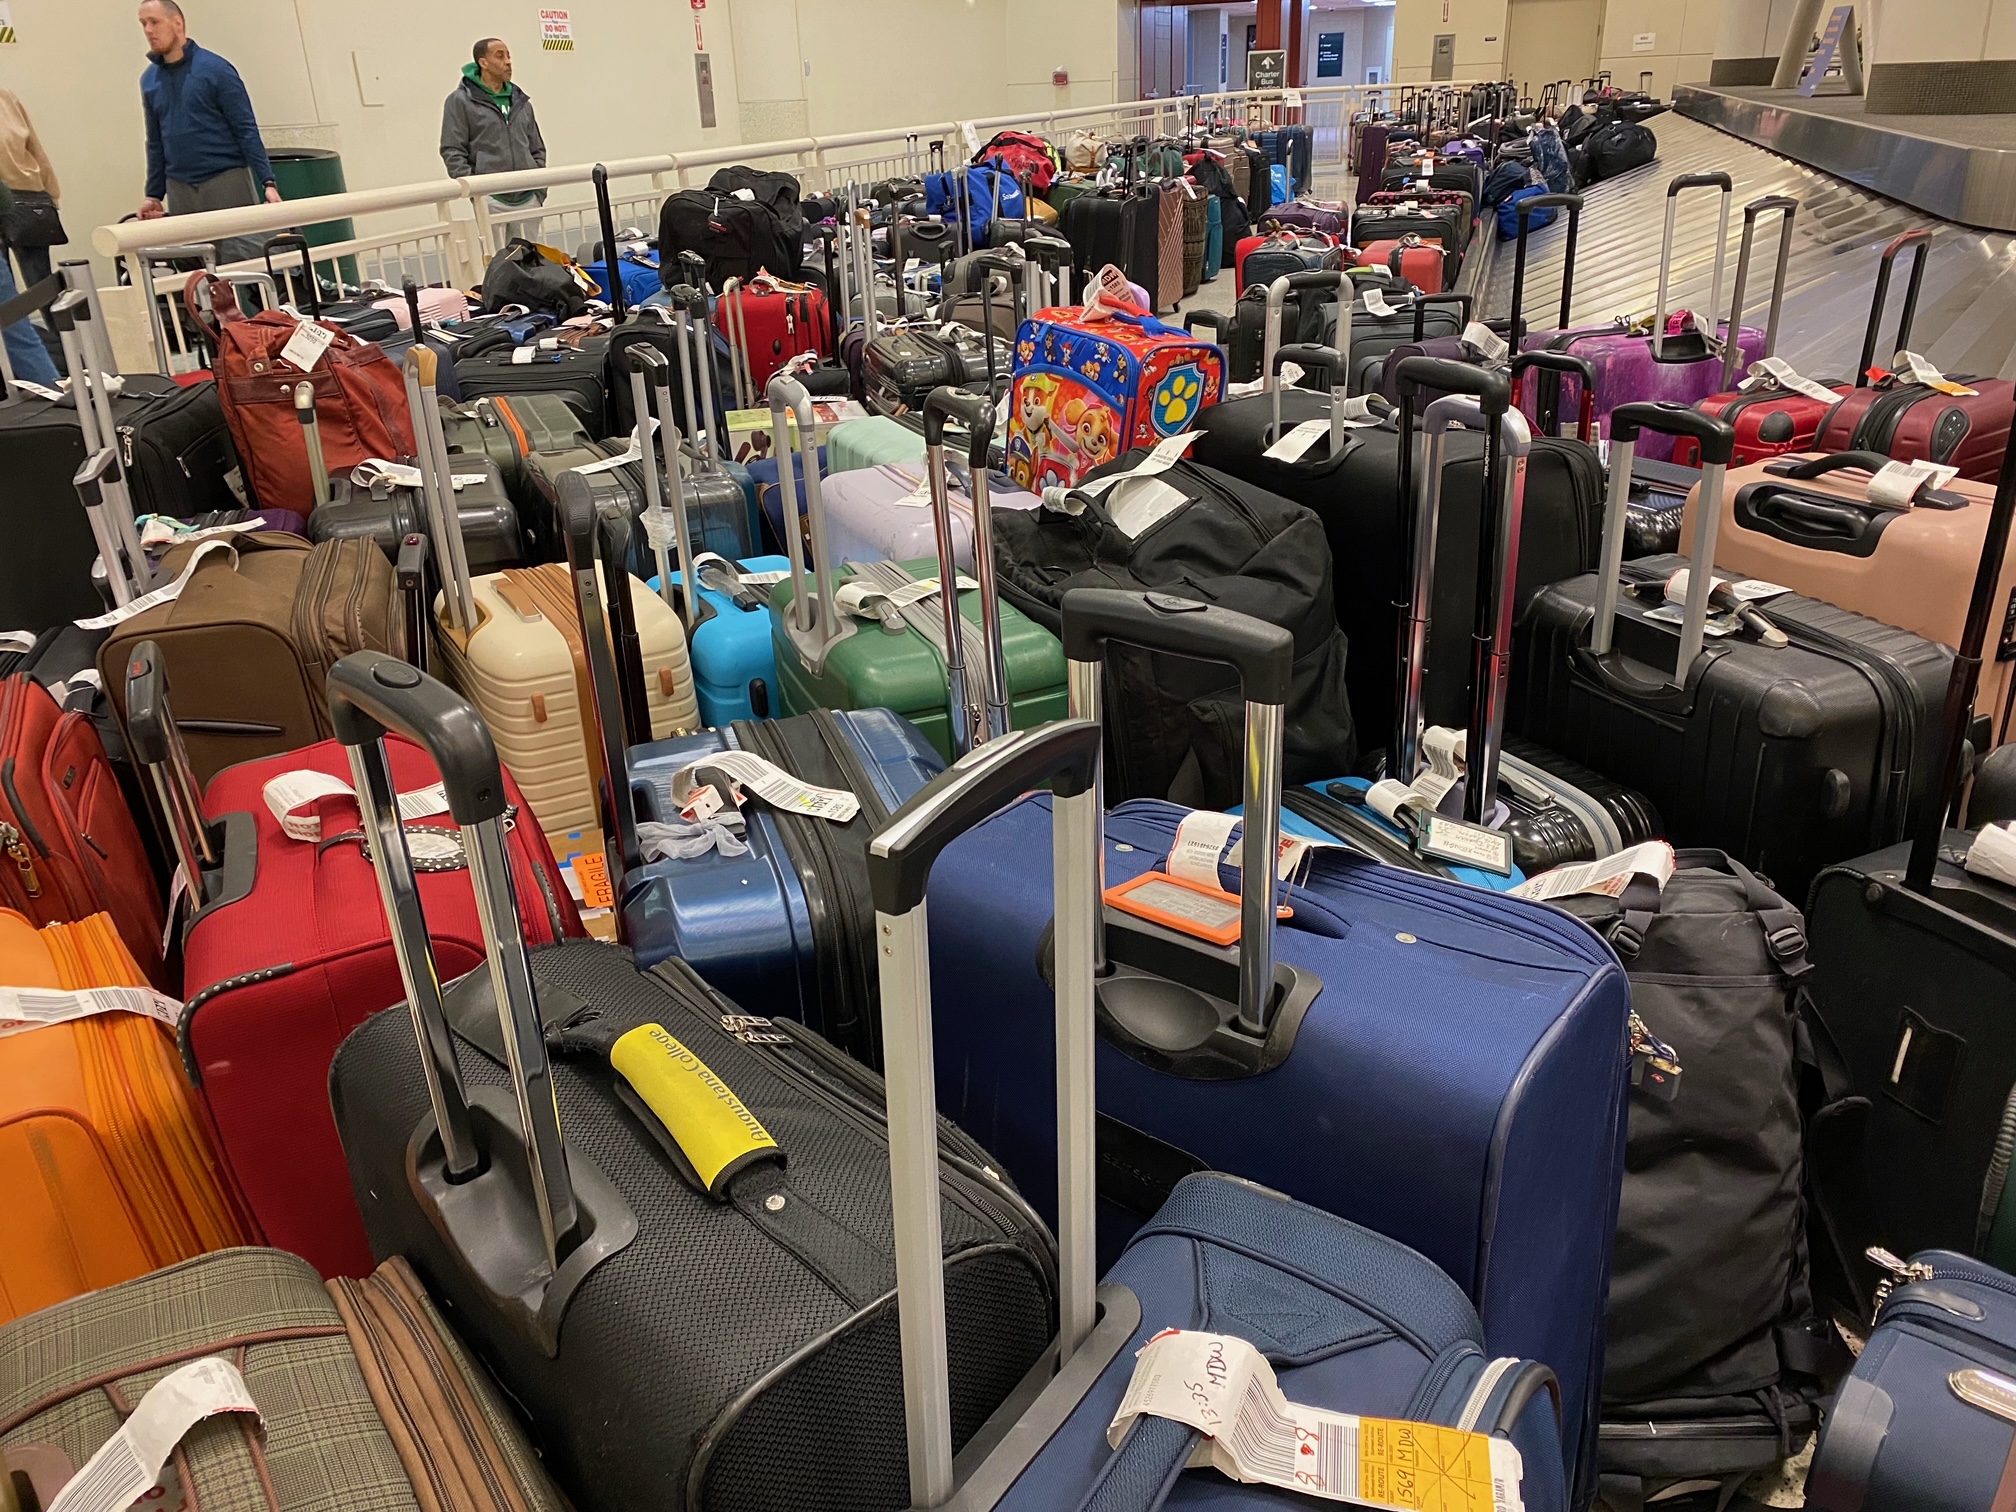 Luggage Piles Up at U.S. Airports – NBC 5 Dallas-Fort Worth